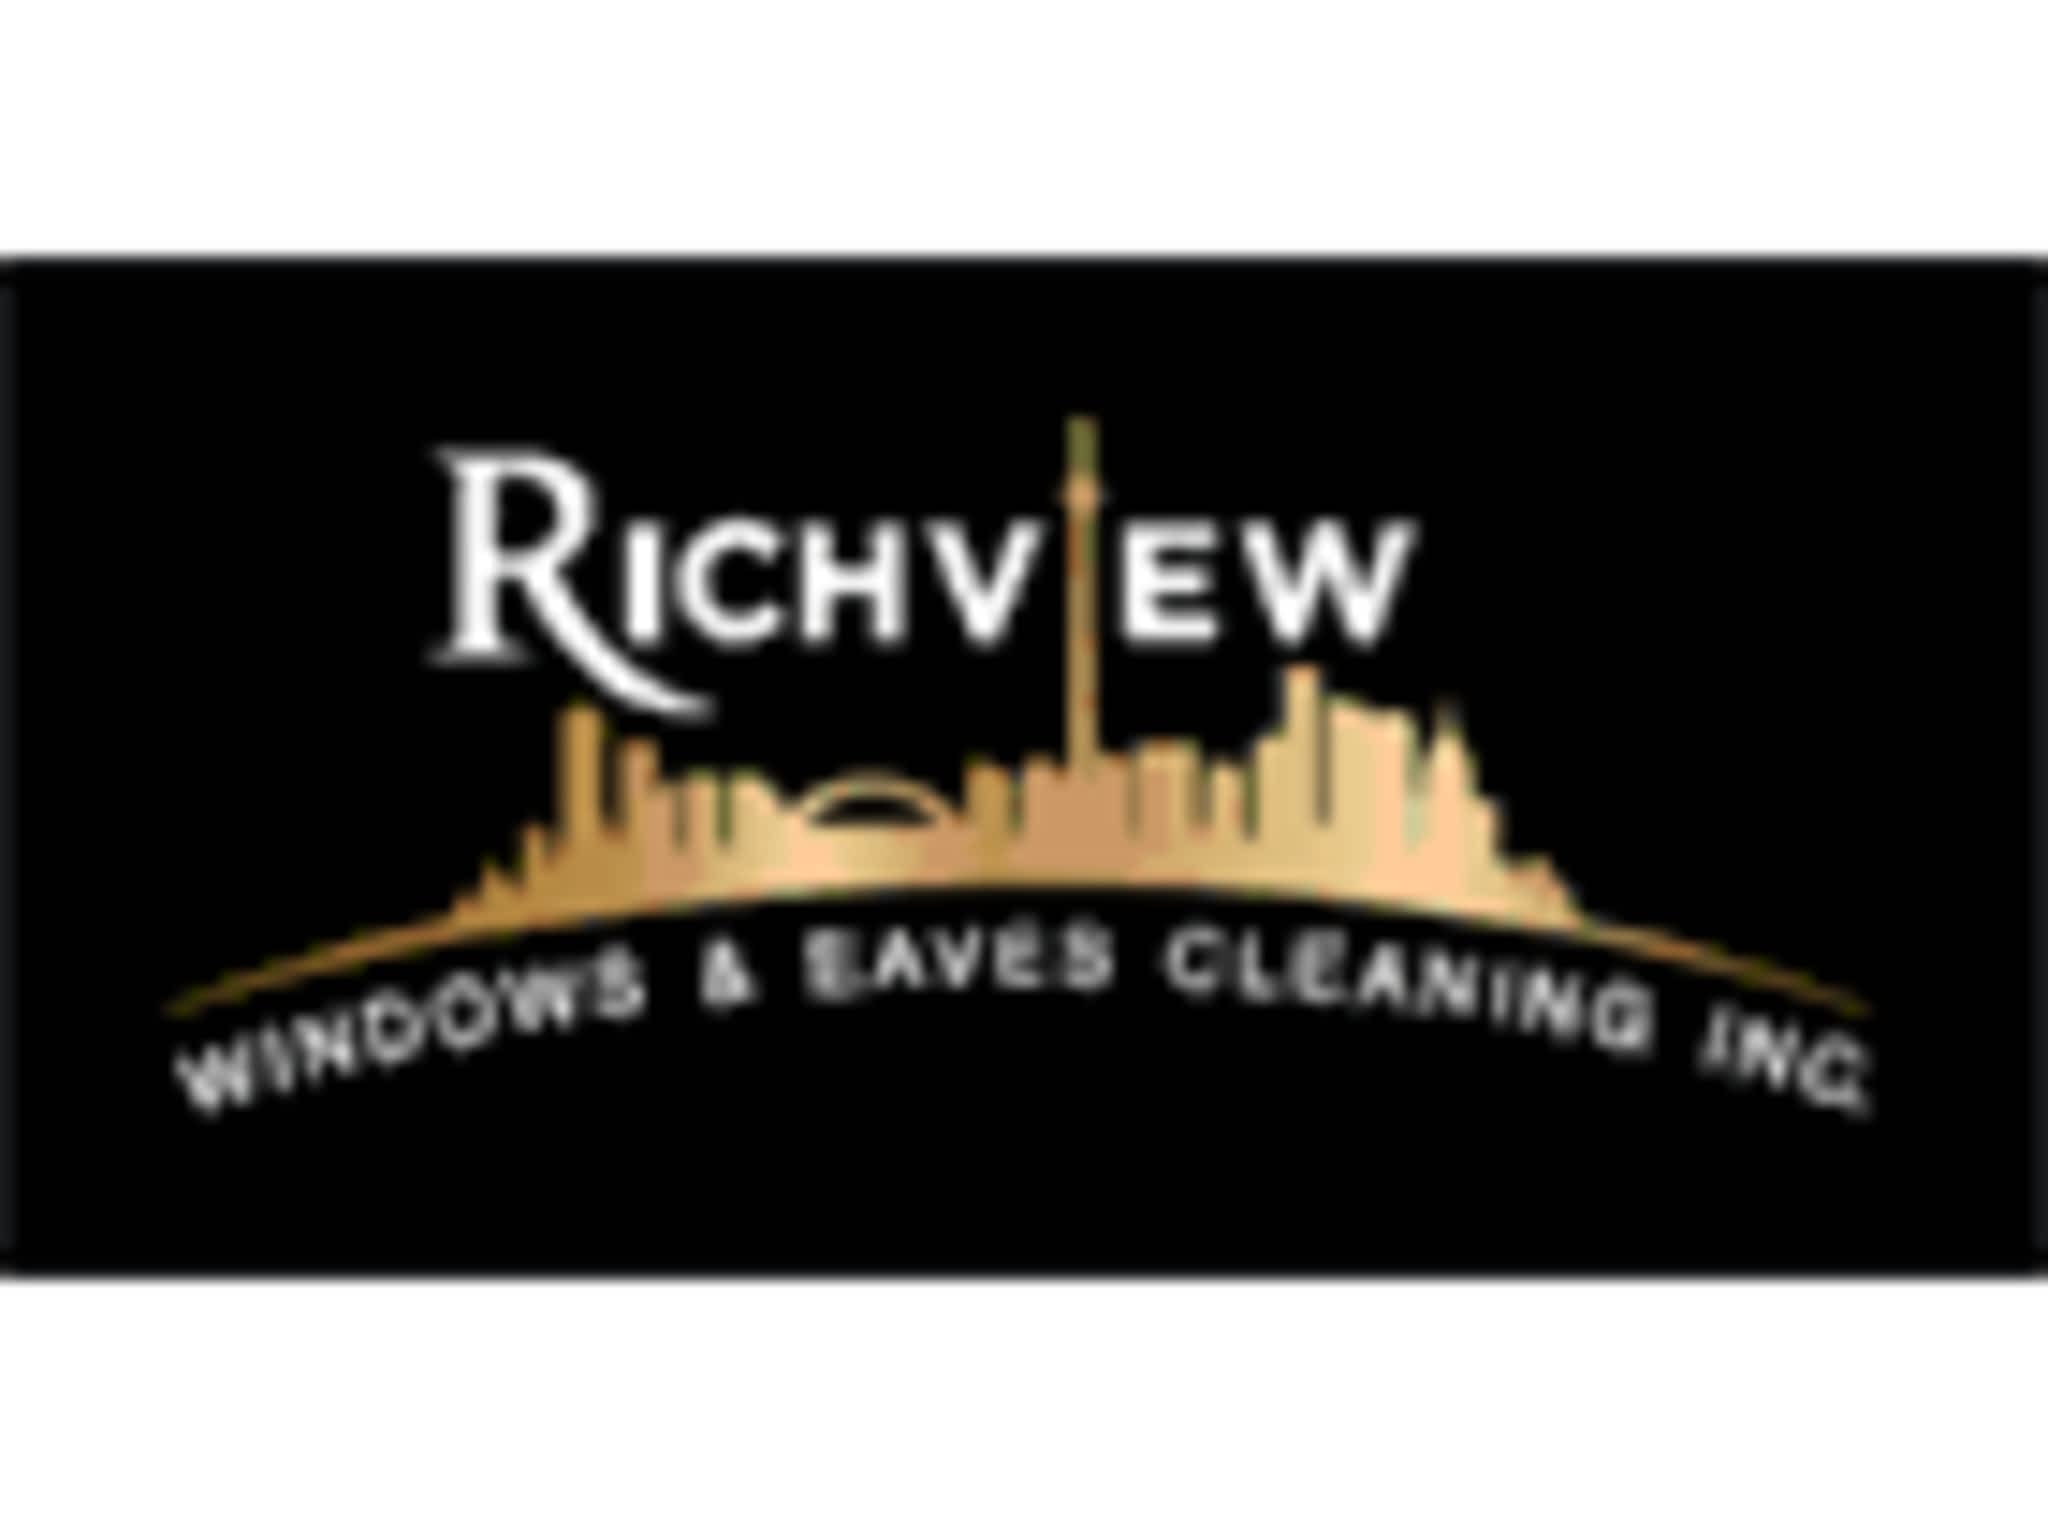 photo Richview Windows and Eaves Cleaning Inc